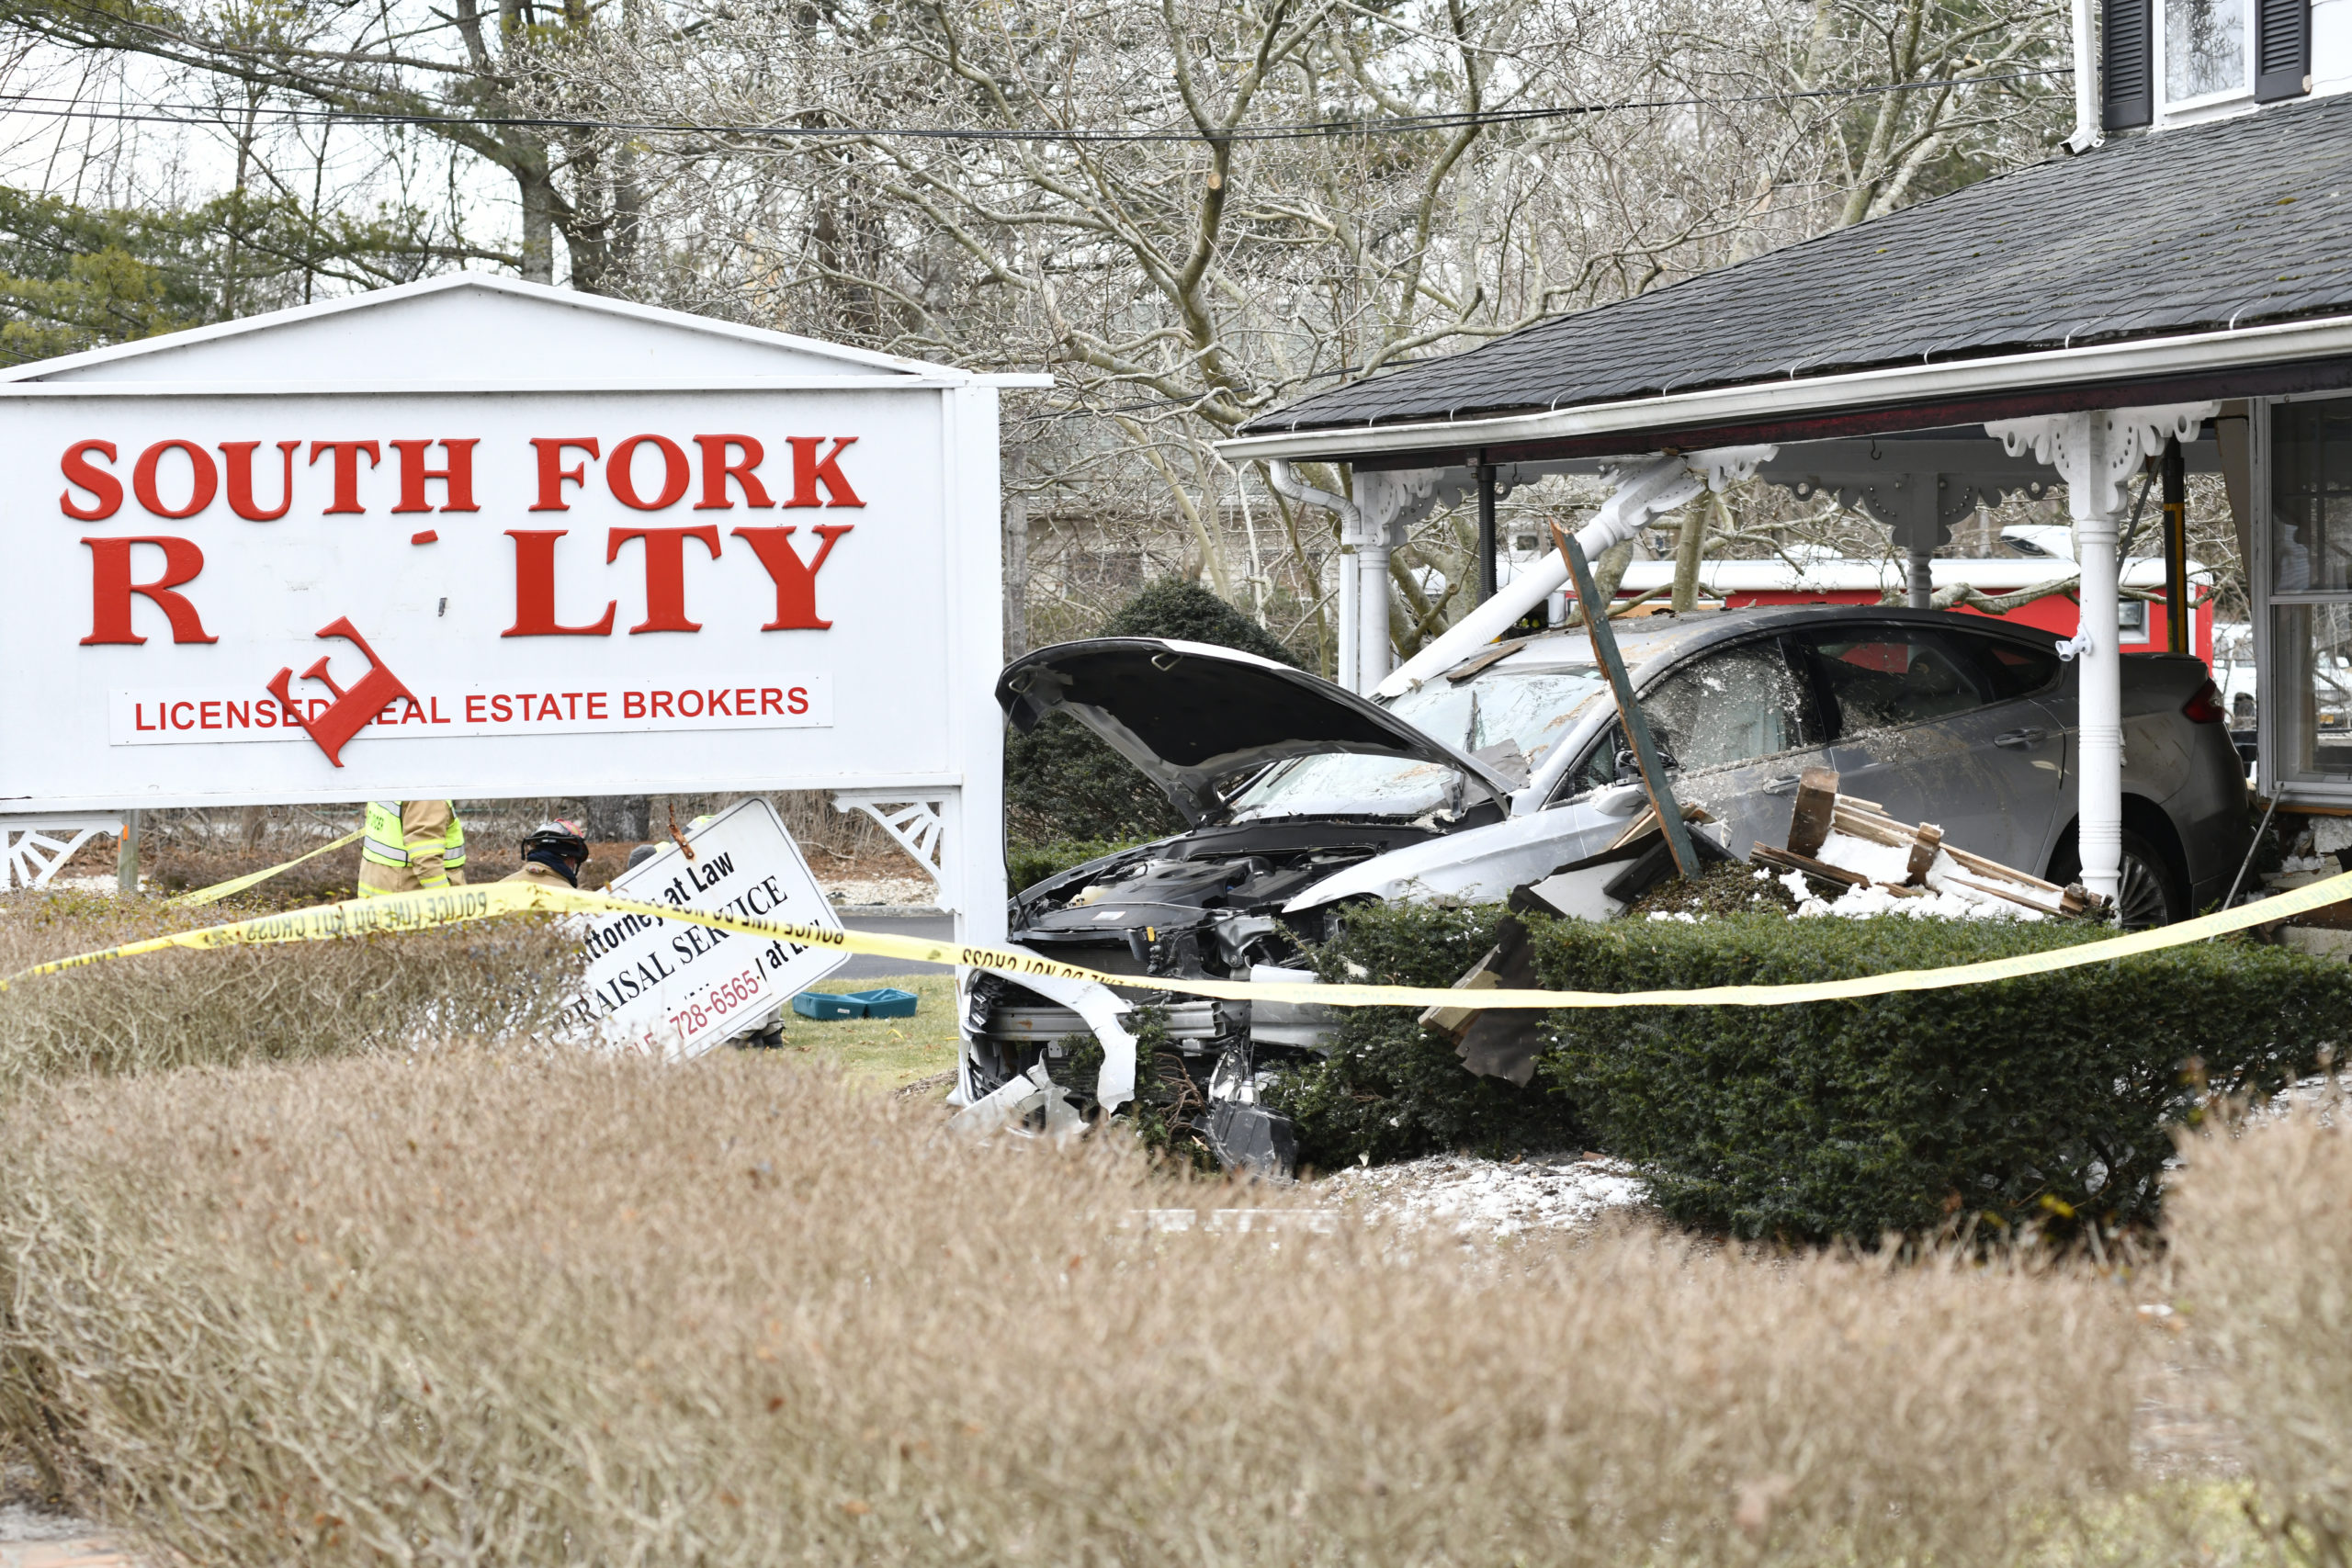 A car crashed into the South Fork Realty building in Hampton Bays on Sunday, January 31.